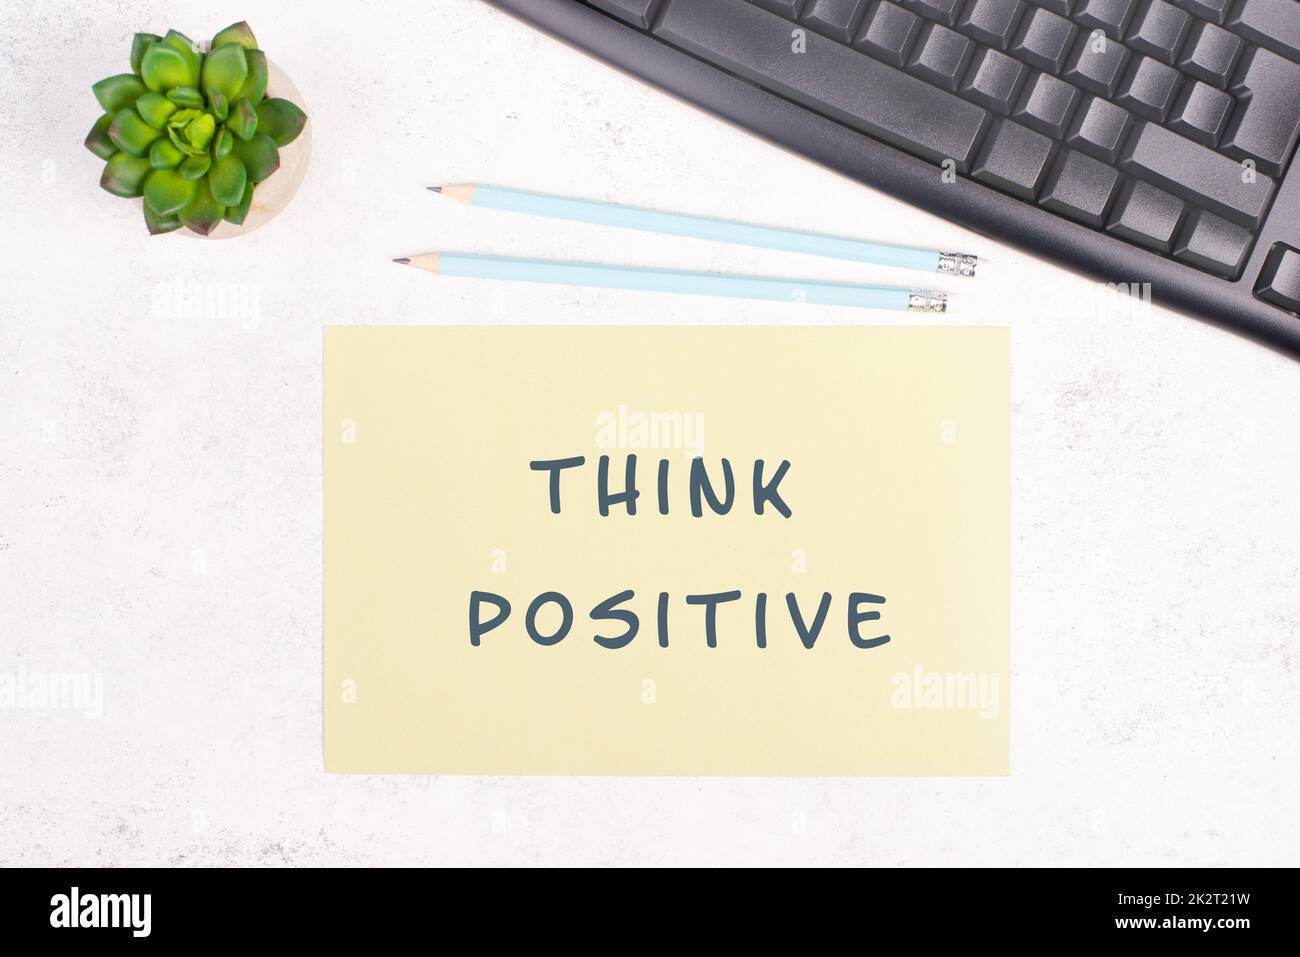 Think positive is standing on a paper, computer keyboard and a cactus, brainstorming for new ideas, new mindest, home office desk Stock Photo